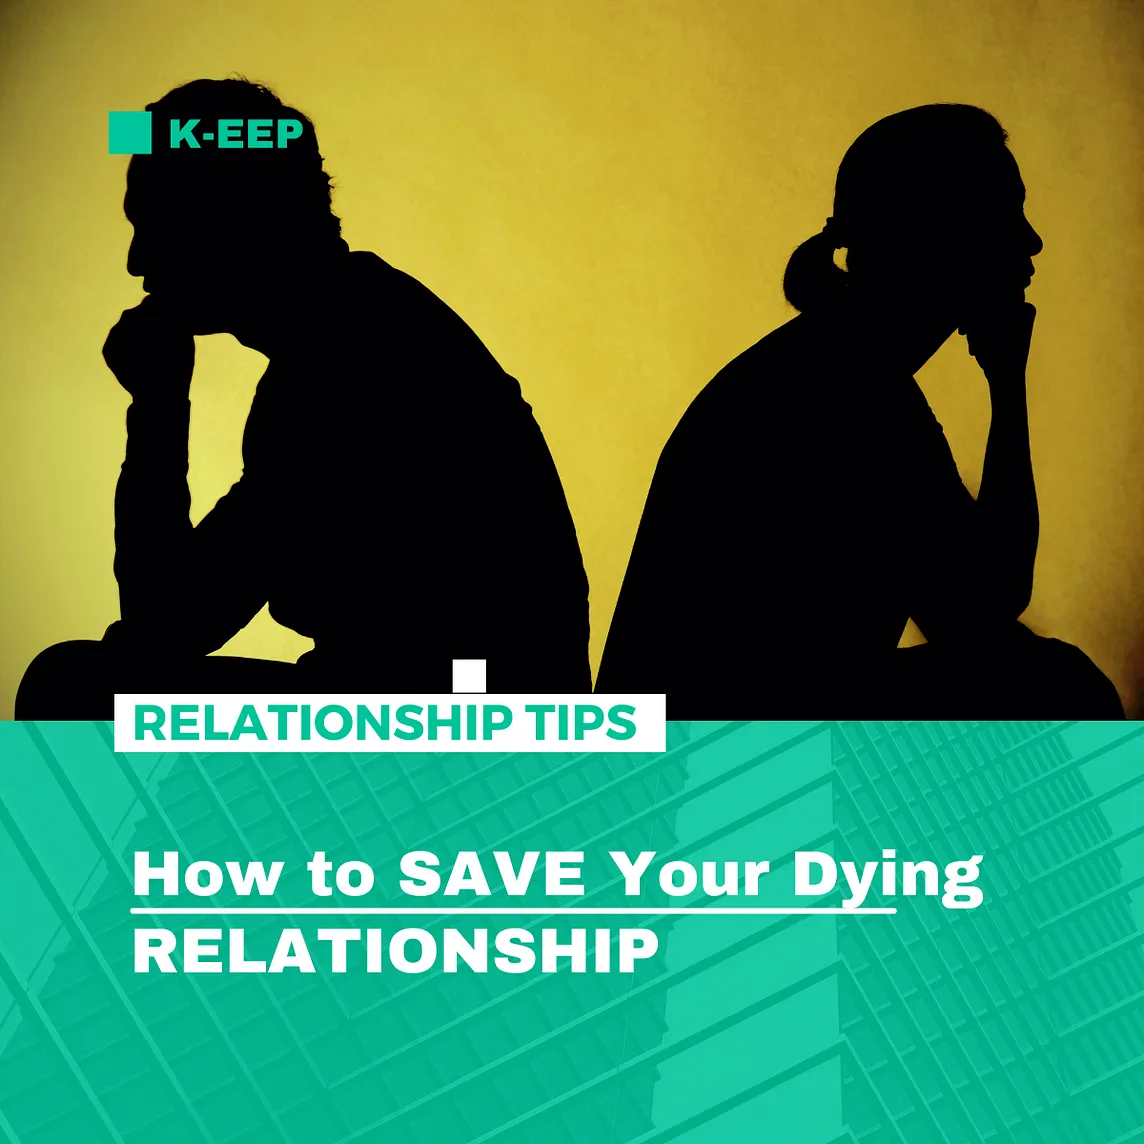 How to SAVE Your Dying RELATIONSHIP